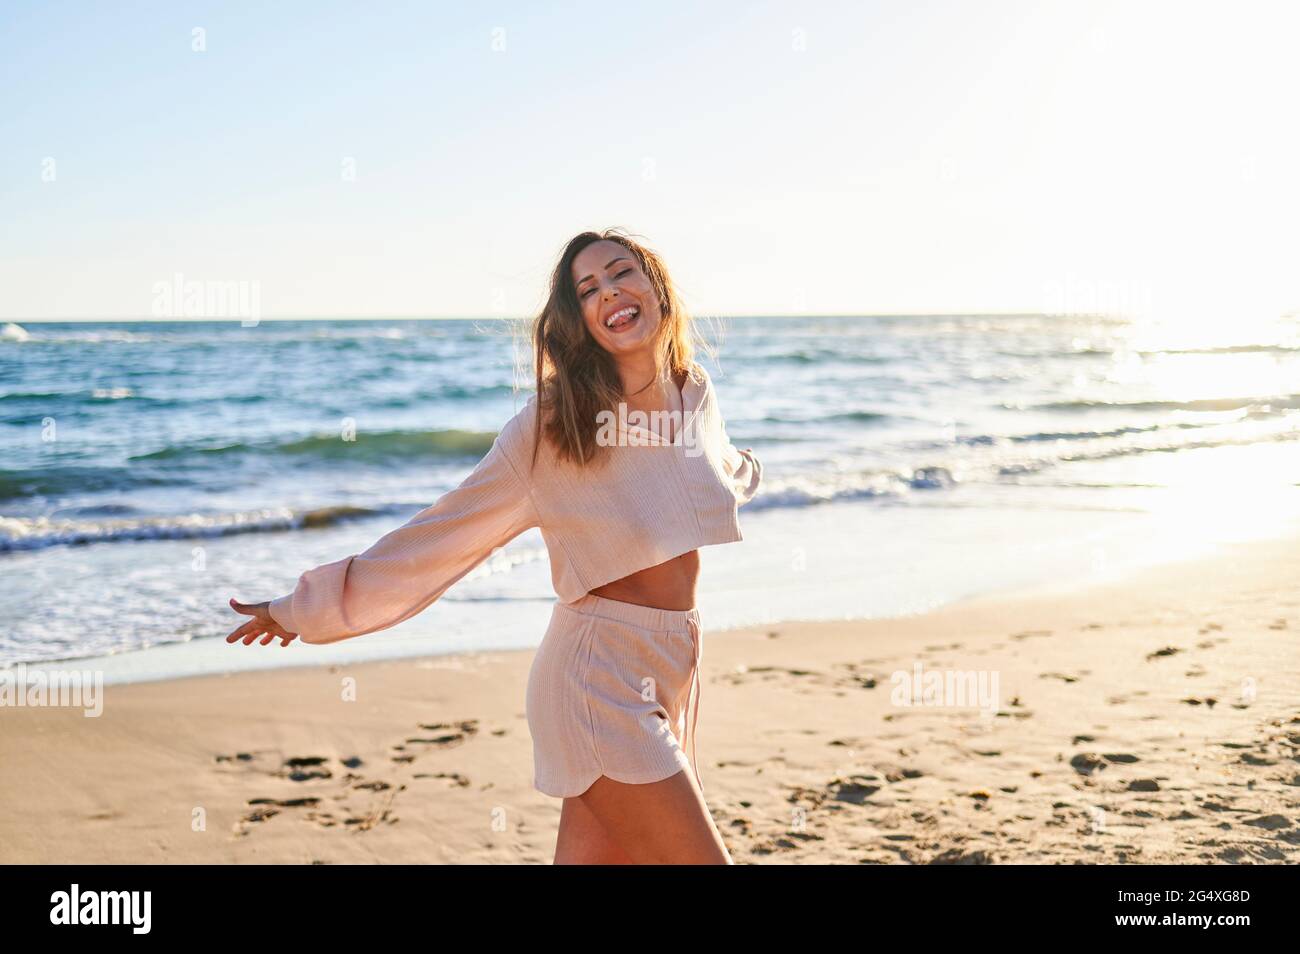 Woman in casual clothing enjoying at beach during sunny day Stock Photo